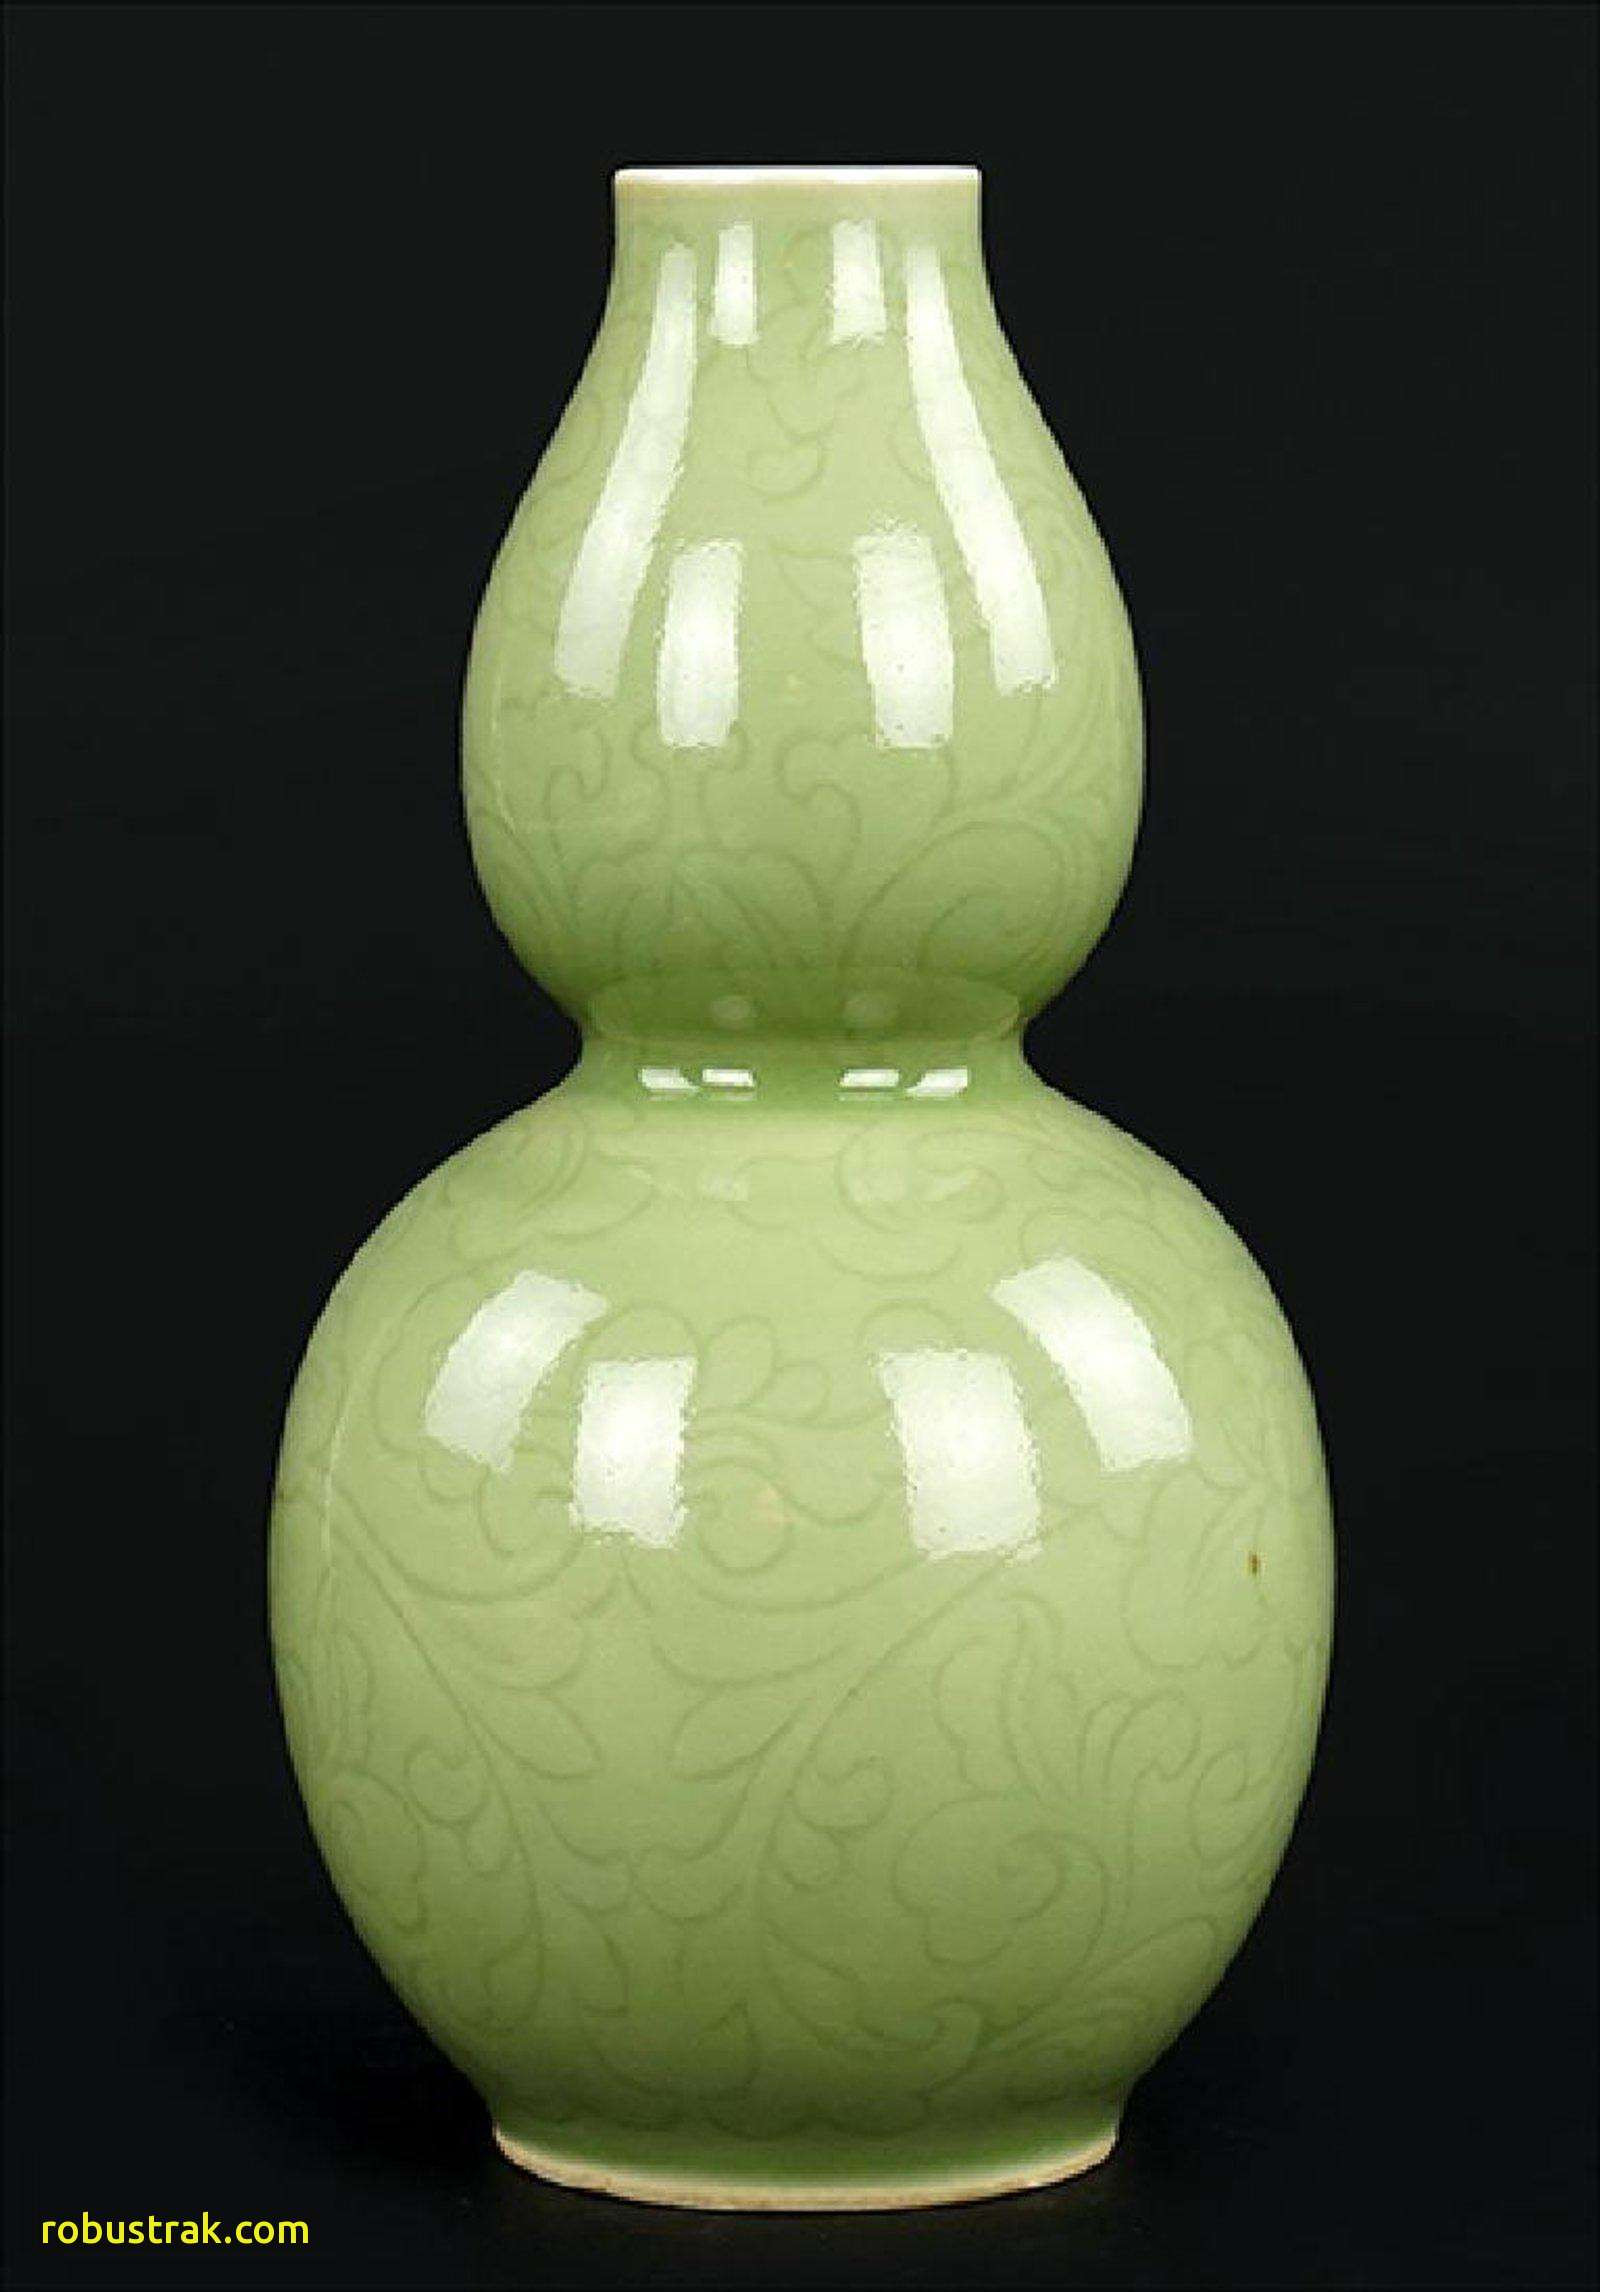 14 Fantastic Yellow Ceramic Vase 2024 free download yellow ceramic vase of luxury yellow living room home design ideas with lime green and turquoise bedroom best living room green vase beautiful 4040cih vases gourd vase